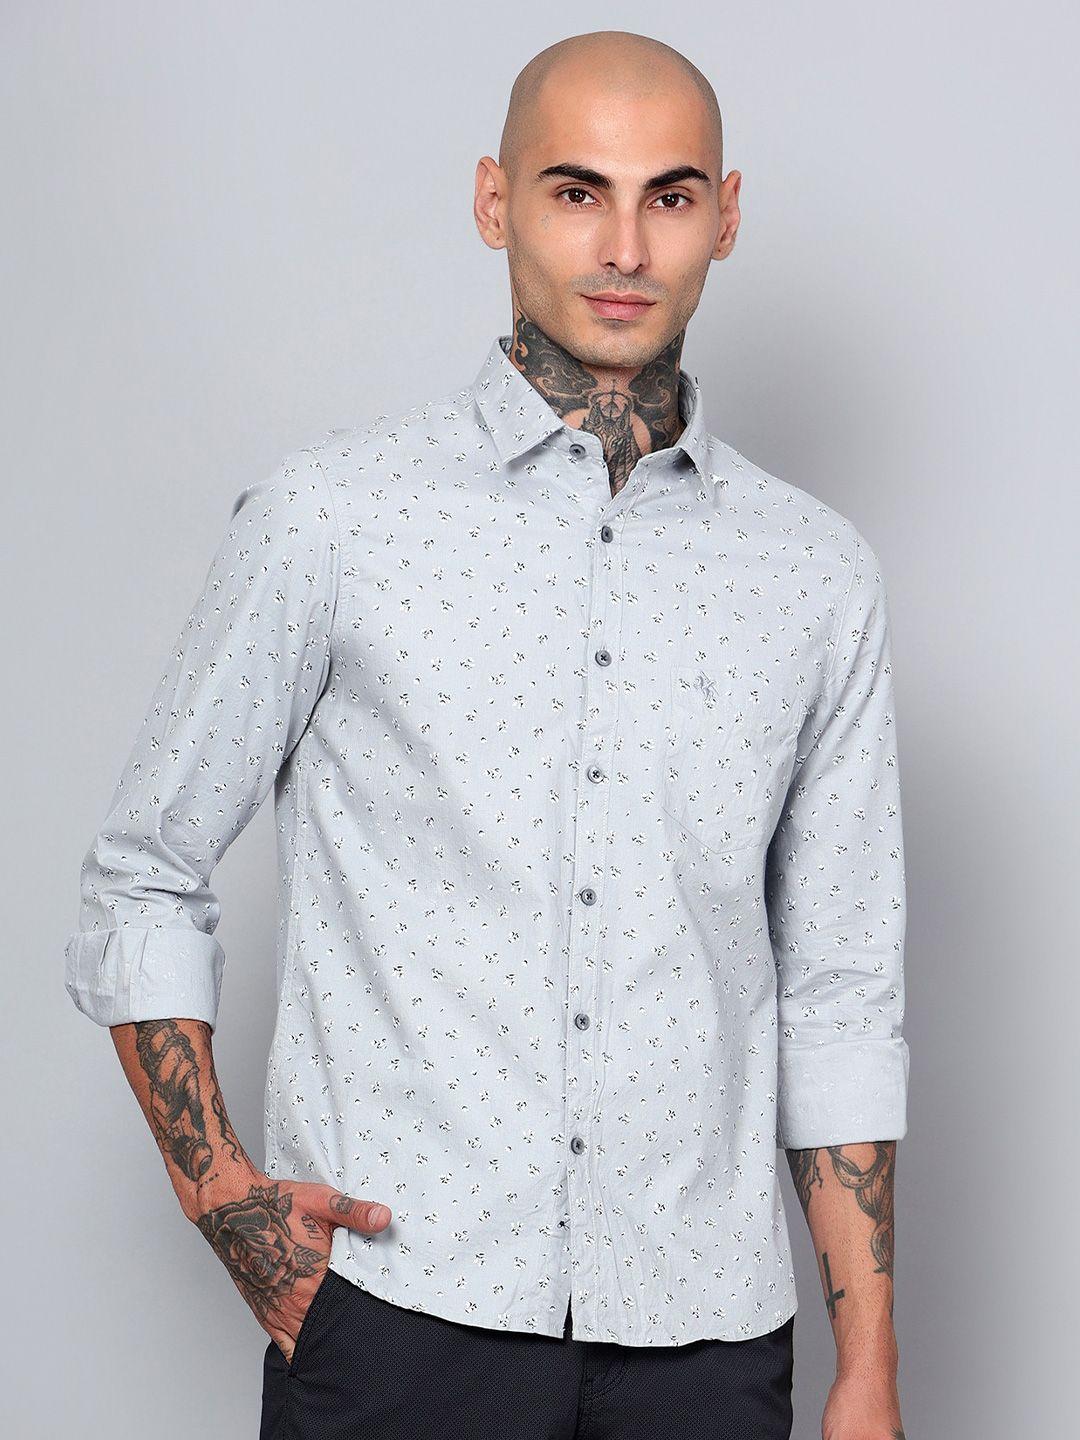 cantabil-comfort-floral-opaque-printed-cotton-casual-shirt